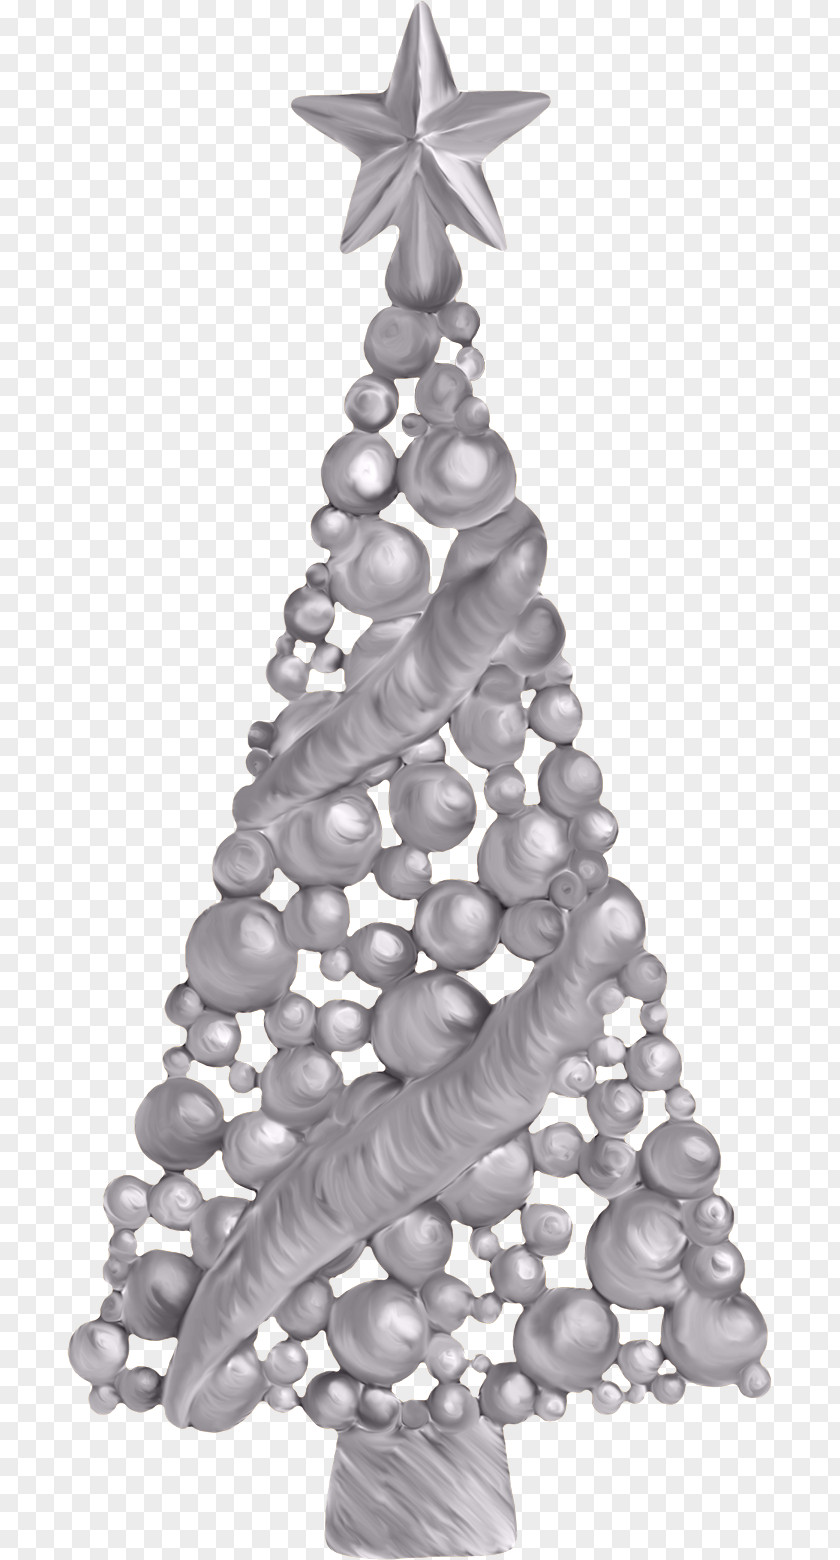 Silver Christmas Tree Decoration Clip Art PNG